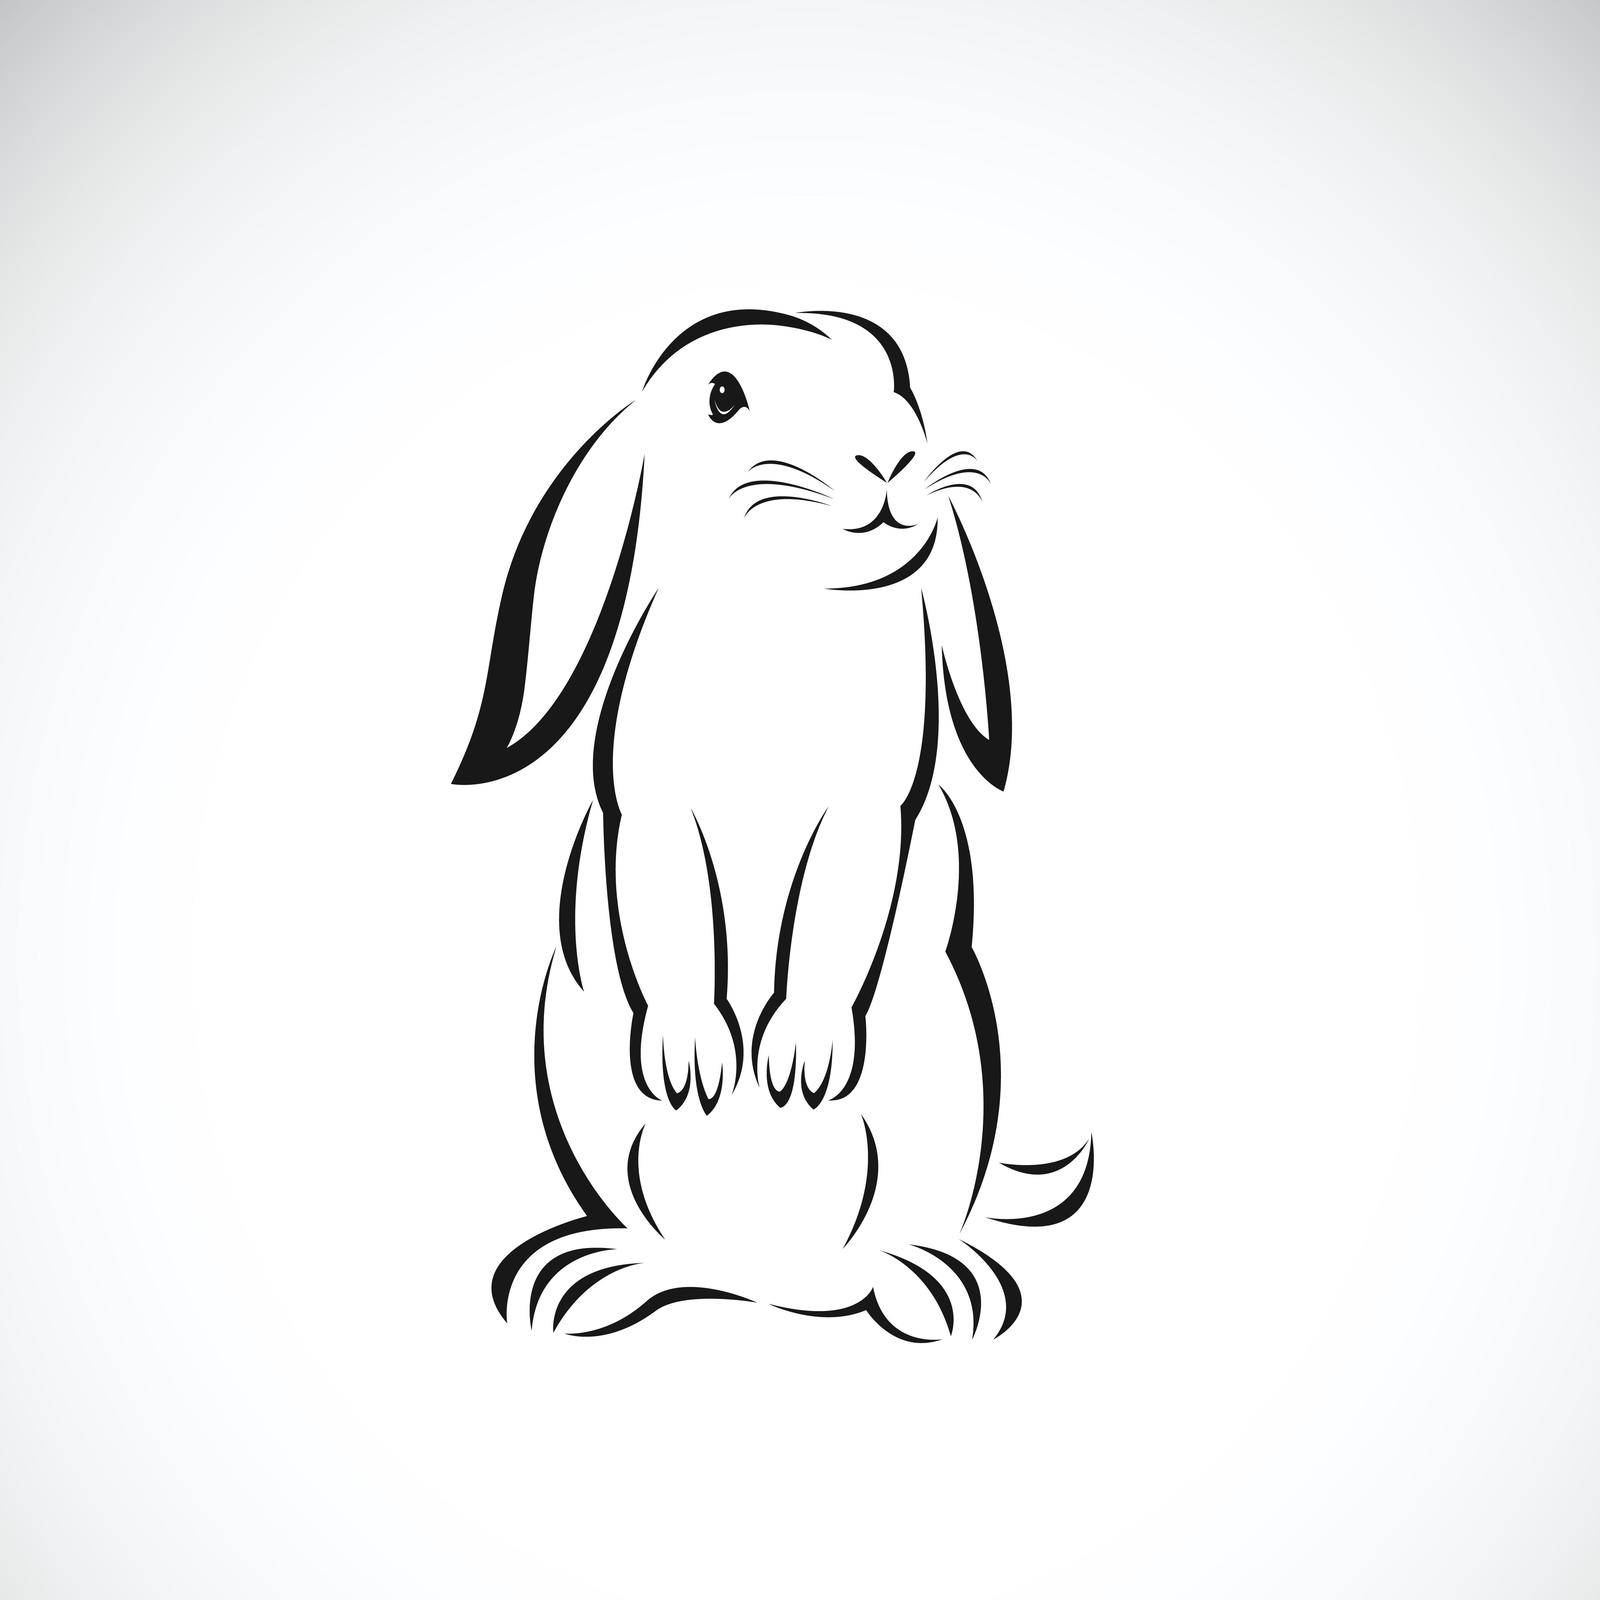 Vector of rabbit design on white background. Easy editable layered vector illustration. Wild animals. by yod67